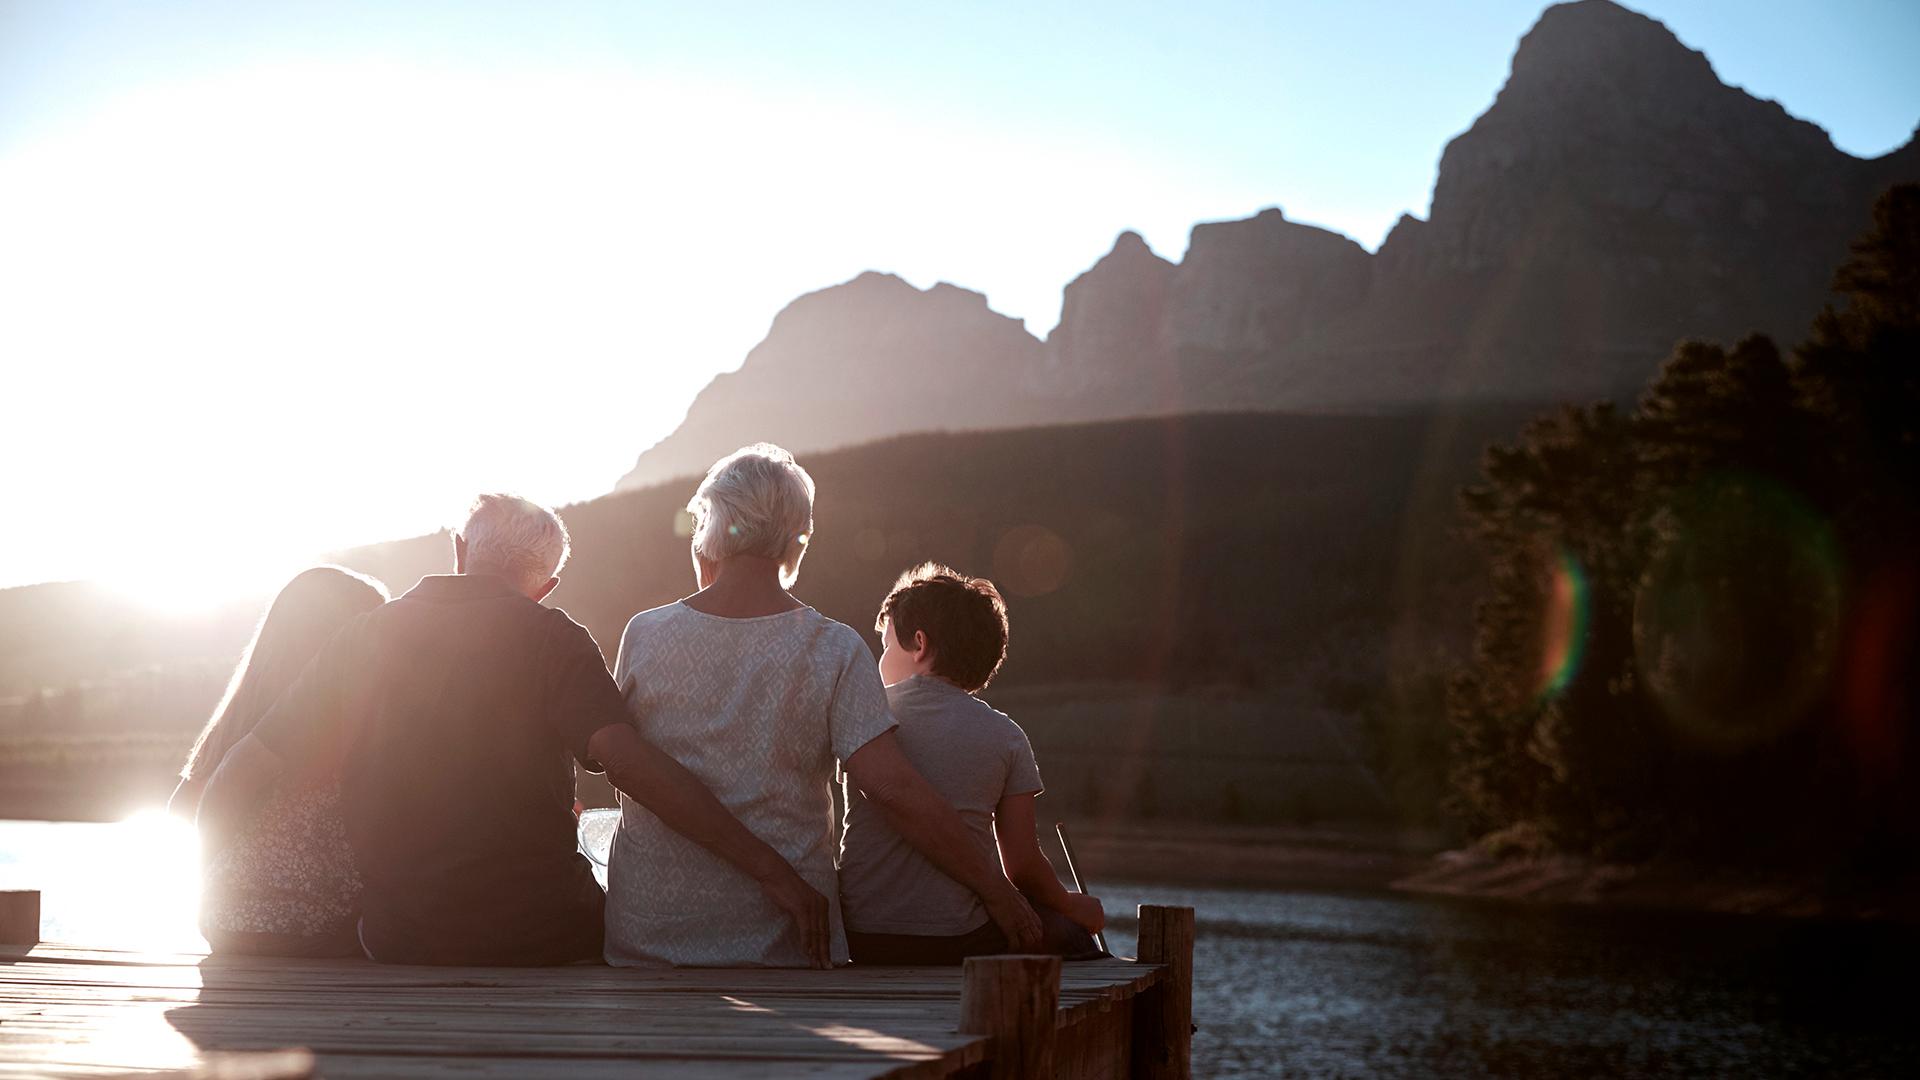 A family of four sits on the edge of a lake dock admiring the sunset behind ocean cliffs.